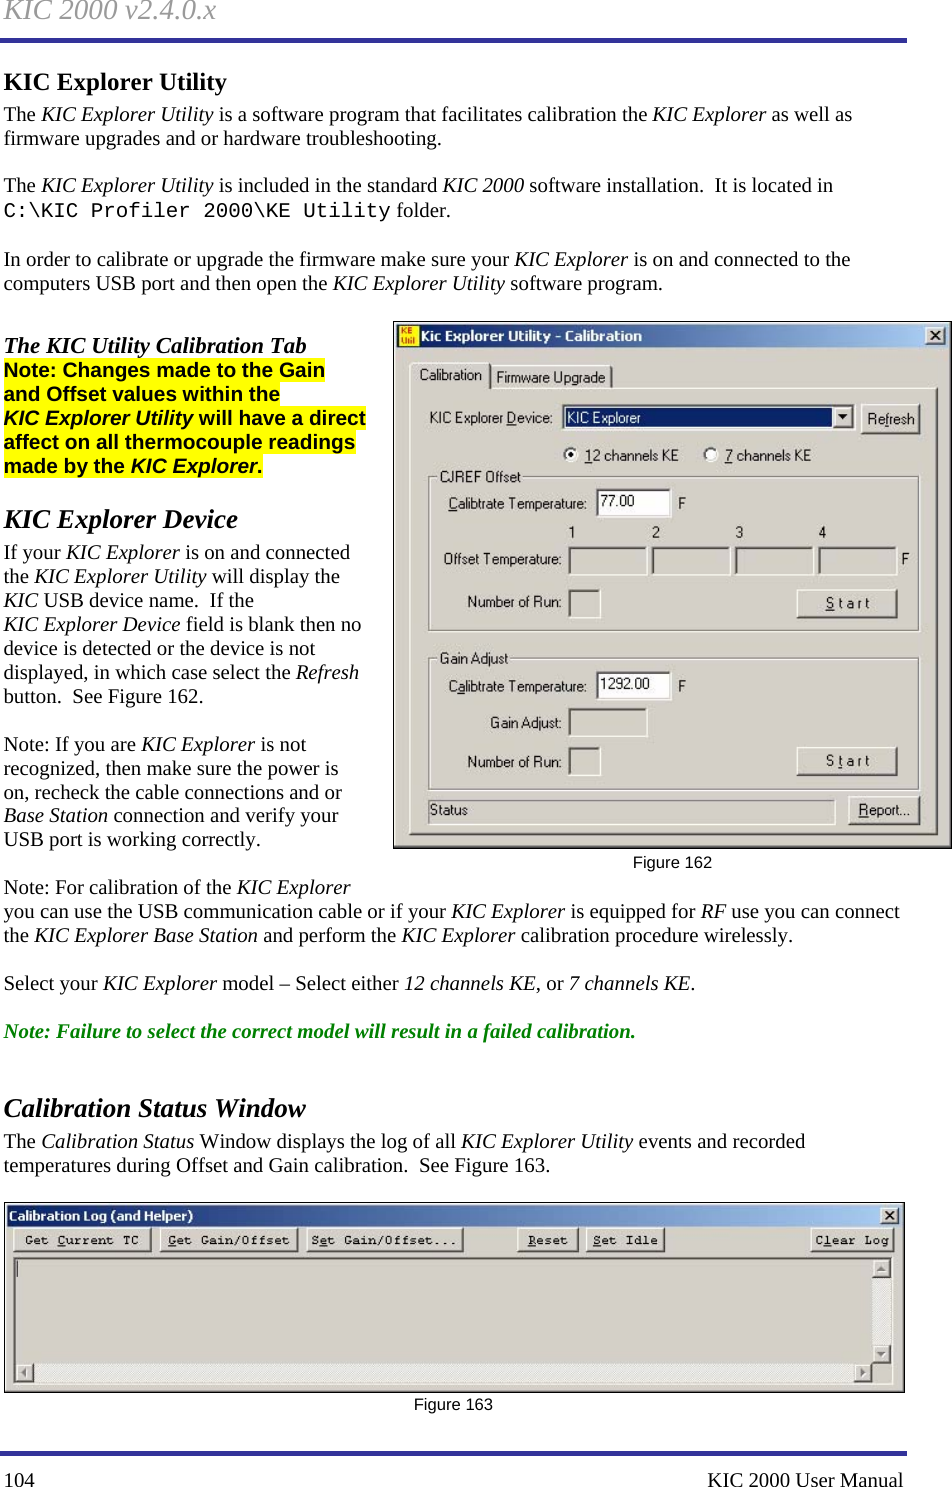 KIC 2000 v2.4.0.x 104    KIC 2000 User Manual KIC Explorer Utility The KIC Explorer Utility is a software program that facilitates calibration the KIC Explorer as well as firmware upgrades and or hardware troubleshooting.  The KIC Explorer Utility is included in the standard KIC 2000 software installation.  It is located in  C:\KIC Profiler 2000\KE Utility folder.    In order to calibrate or upgrade the firmware make sure your KIC Explorer is on and connected to the computers USB port and then open the KIC Explorer Utility software program.  The KIC Utility Calibration Tab Note: Changes made to the Gain and Offset values within the KIC Explorer Utility will have a direct affect on all thermocouple readings made by the KIC Explorer.   KIC Explorer Device  If your KIC Explorer is on and connected the KIC Explorer Utility will display the KIC USB device name.  If the KIC Explorer Device field is blank then no device is detected or the device is not displayed, in which case select the Refresh button.  See Figure 162.    Note: If you are KIC Explorer is not recognized, then make sure the power is on, recheck the cable connections and or Base Station connection and verify your USB port is working correctly.     Note: For calibration of the KIC Explorer you can use the USB communication cable or if your KIC Explorer is equipped for RF use you can connect the KIC Explorer Base Station and perform the KIC Explorer calibration procedure wirelessly.    Select your KIC Explorer model – Select either 12 channels KE, or 7 channels KE.  Note: Failure to select the correct model will result in a failed calibration.  Calibration Status Window The Calibration Status Window displays the log of all KIC Explorer Utility events and recorded temperatures during Offset and Gain calibration.  See Figure 163.     Figure 163  Figure 162 